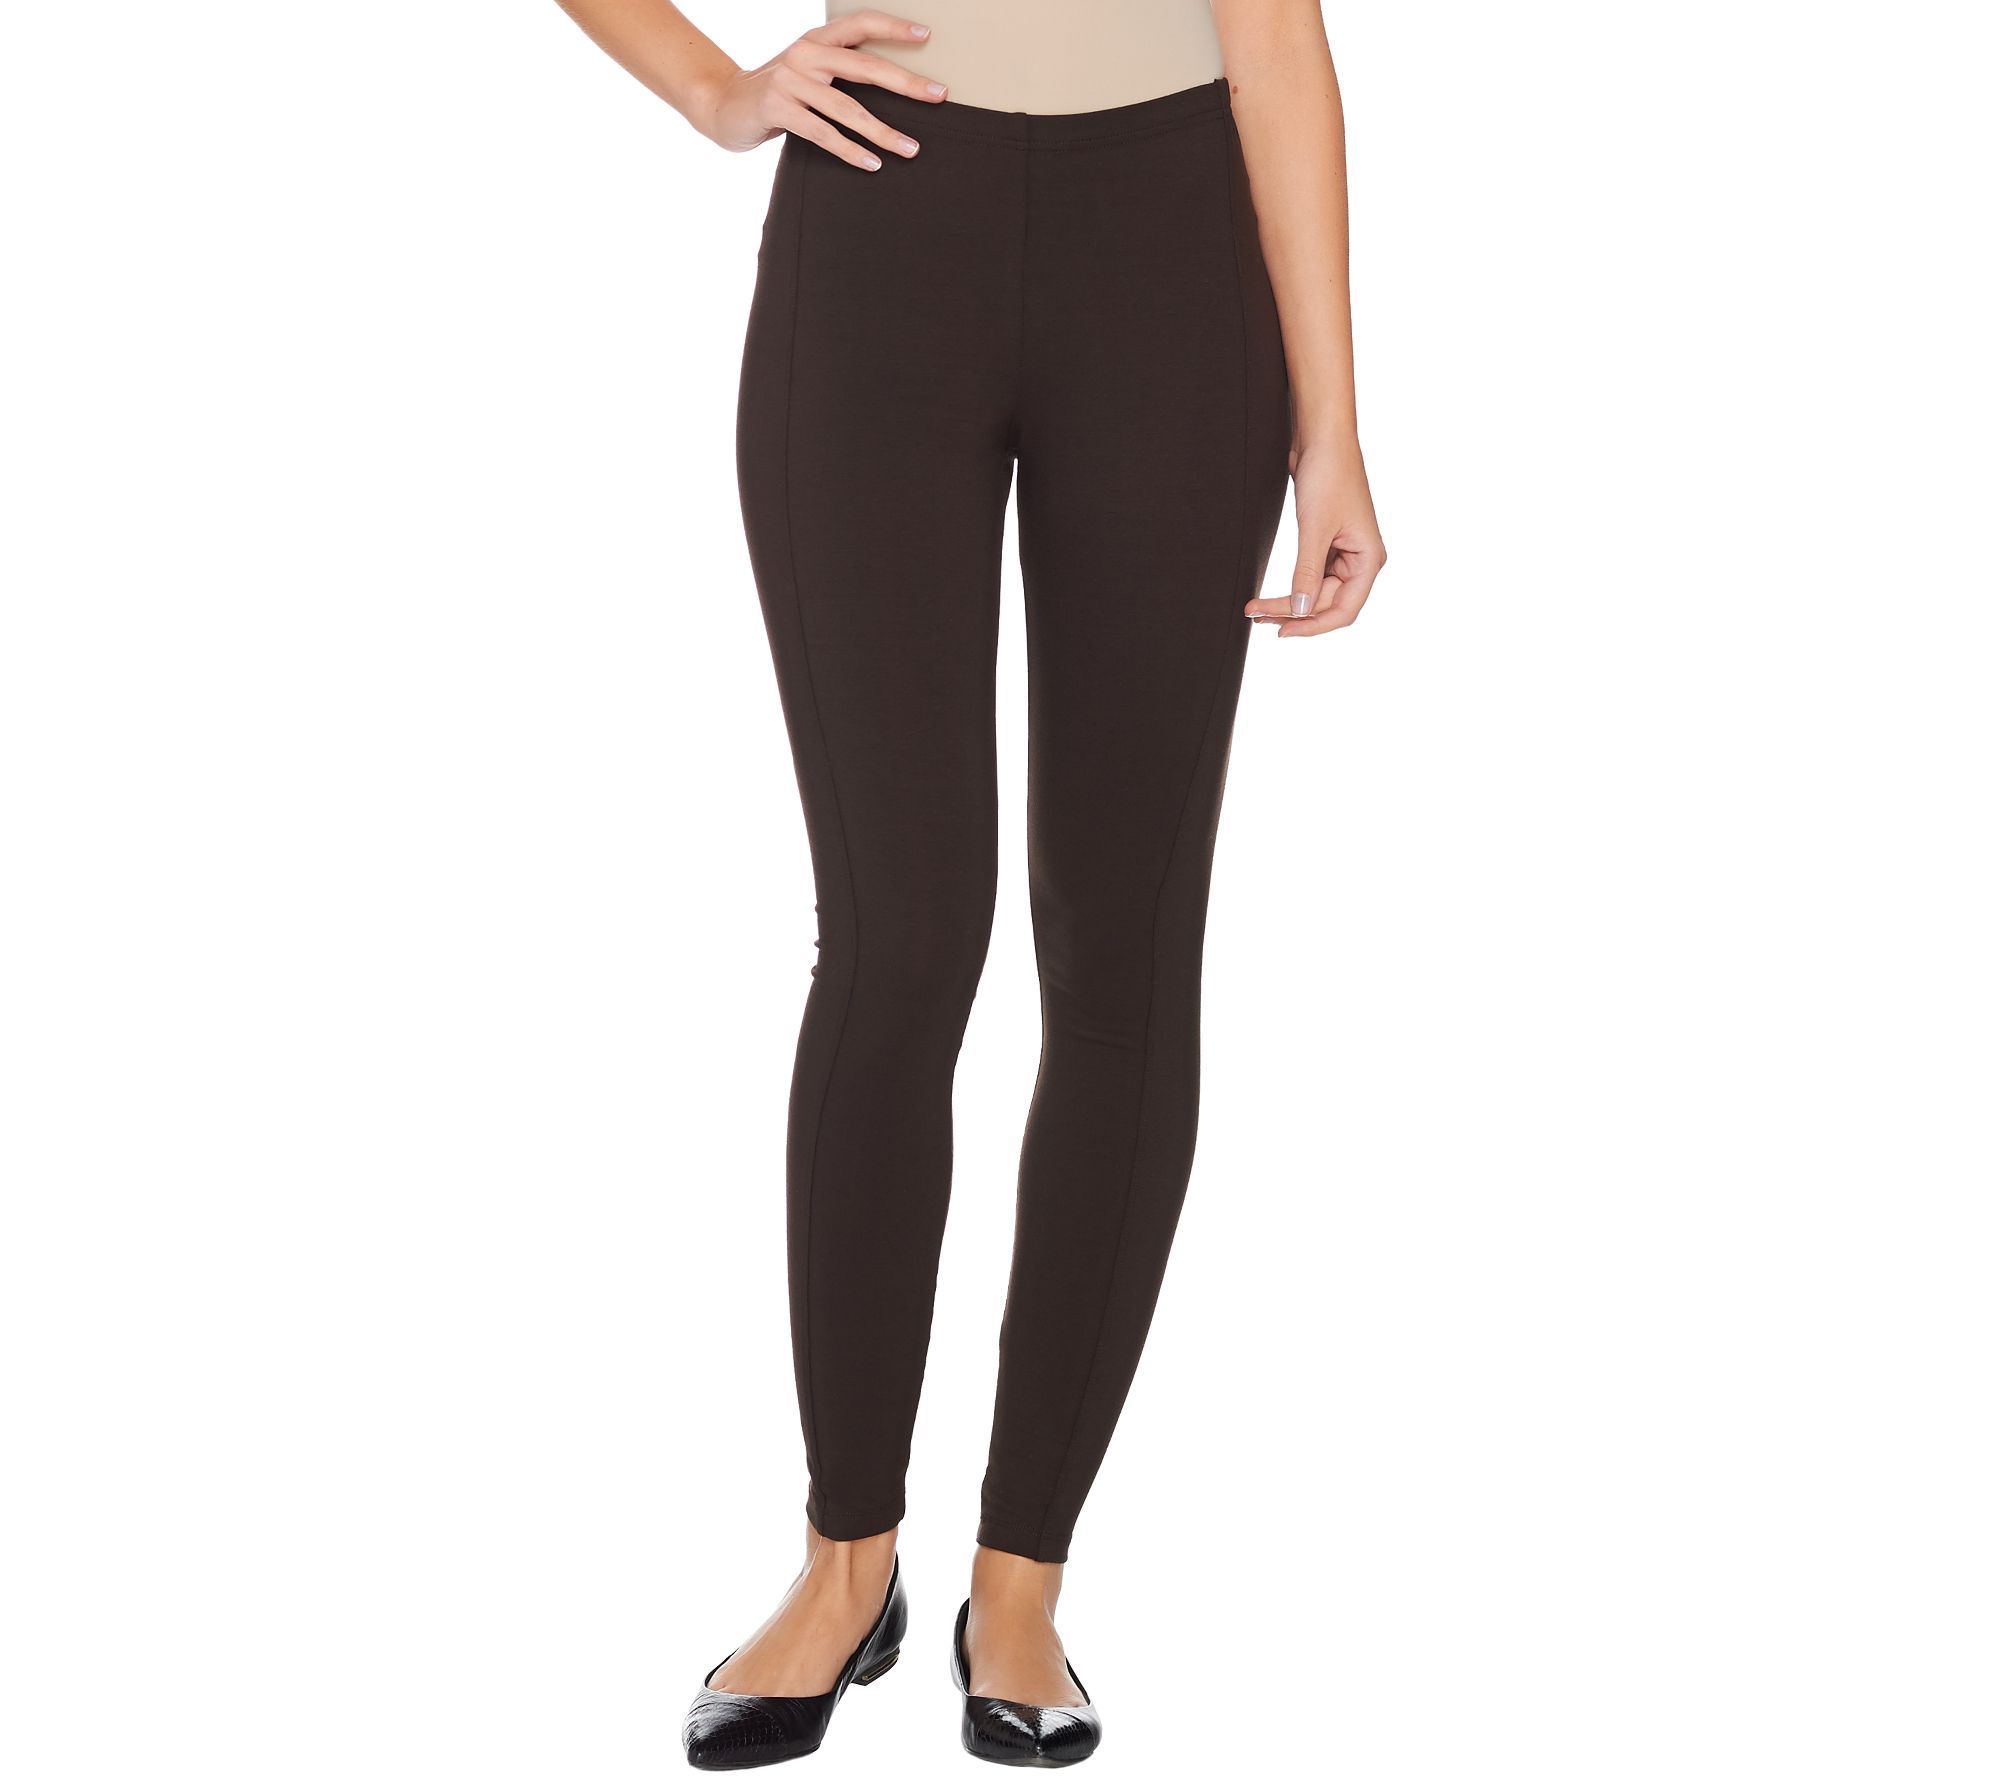 Women with Control Tall Pull-On Leggings with Side Panels - Page 1 ...